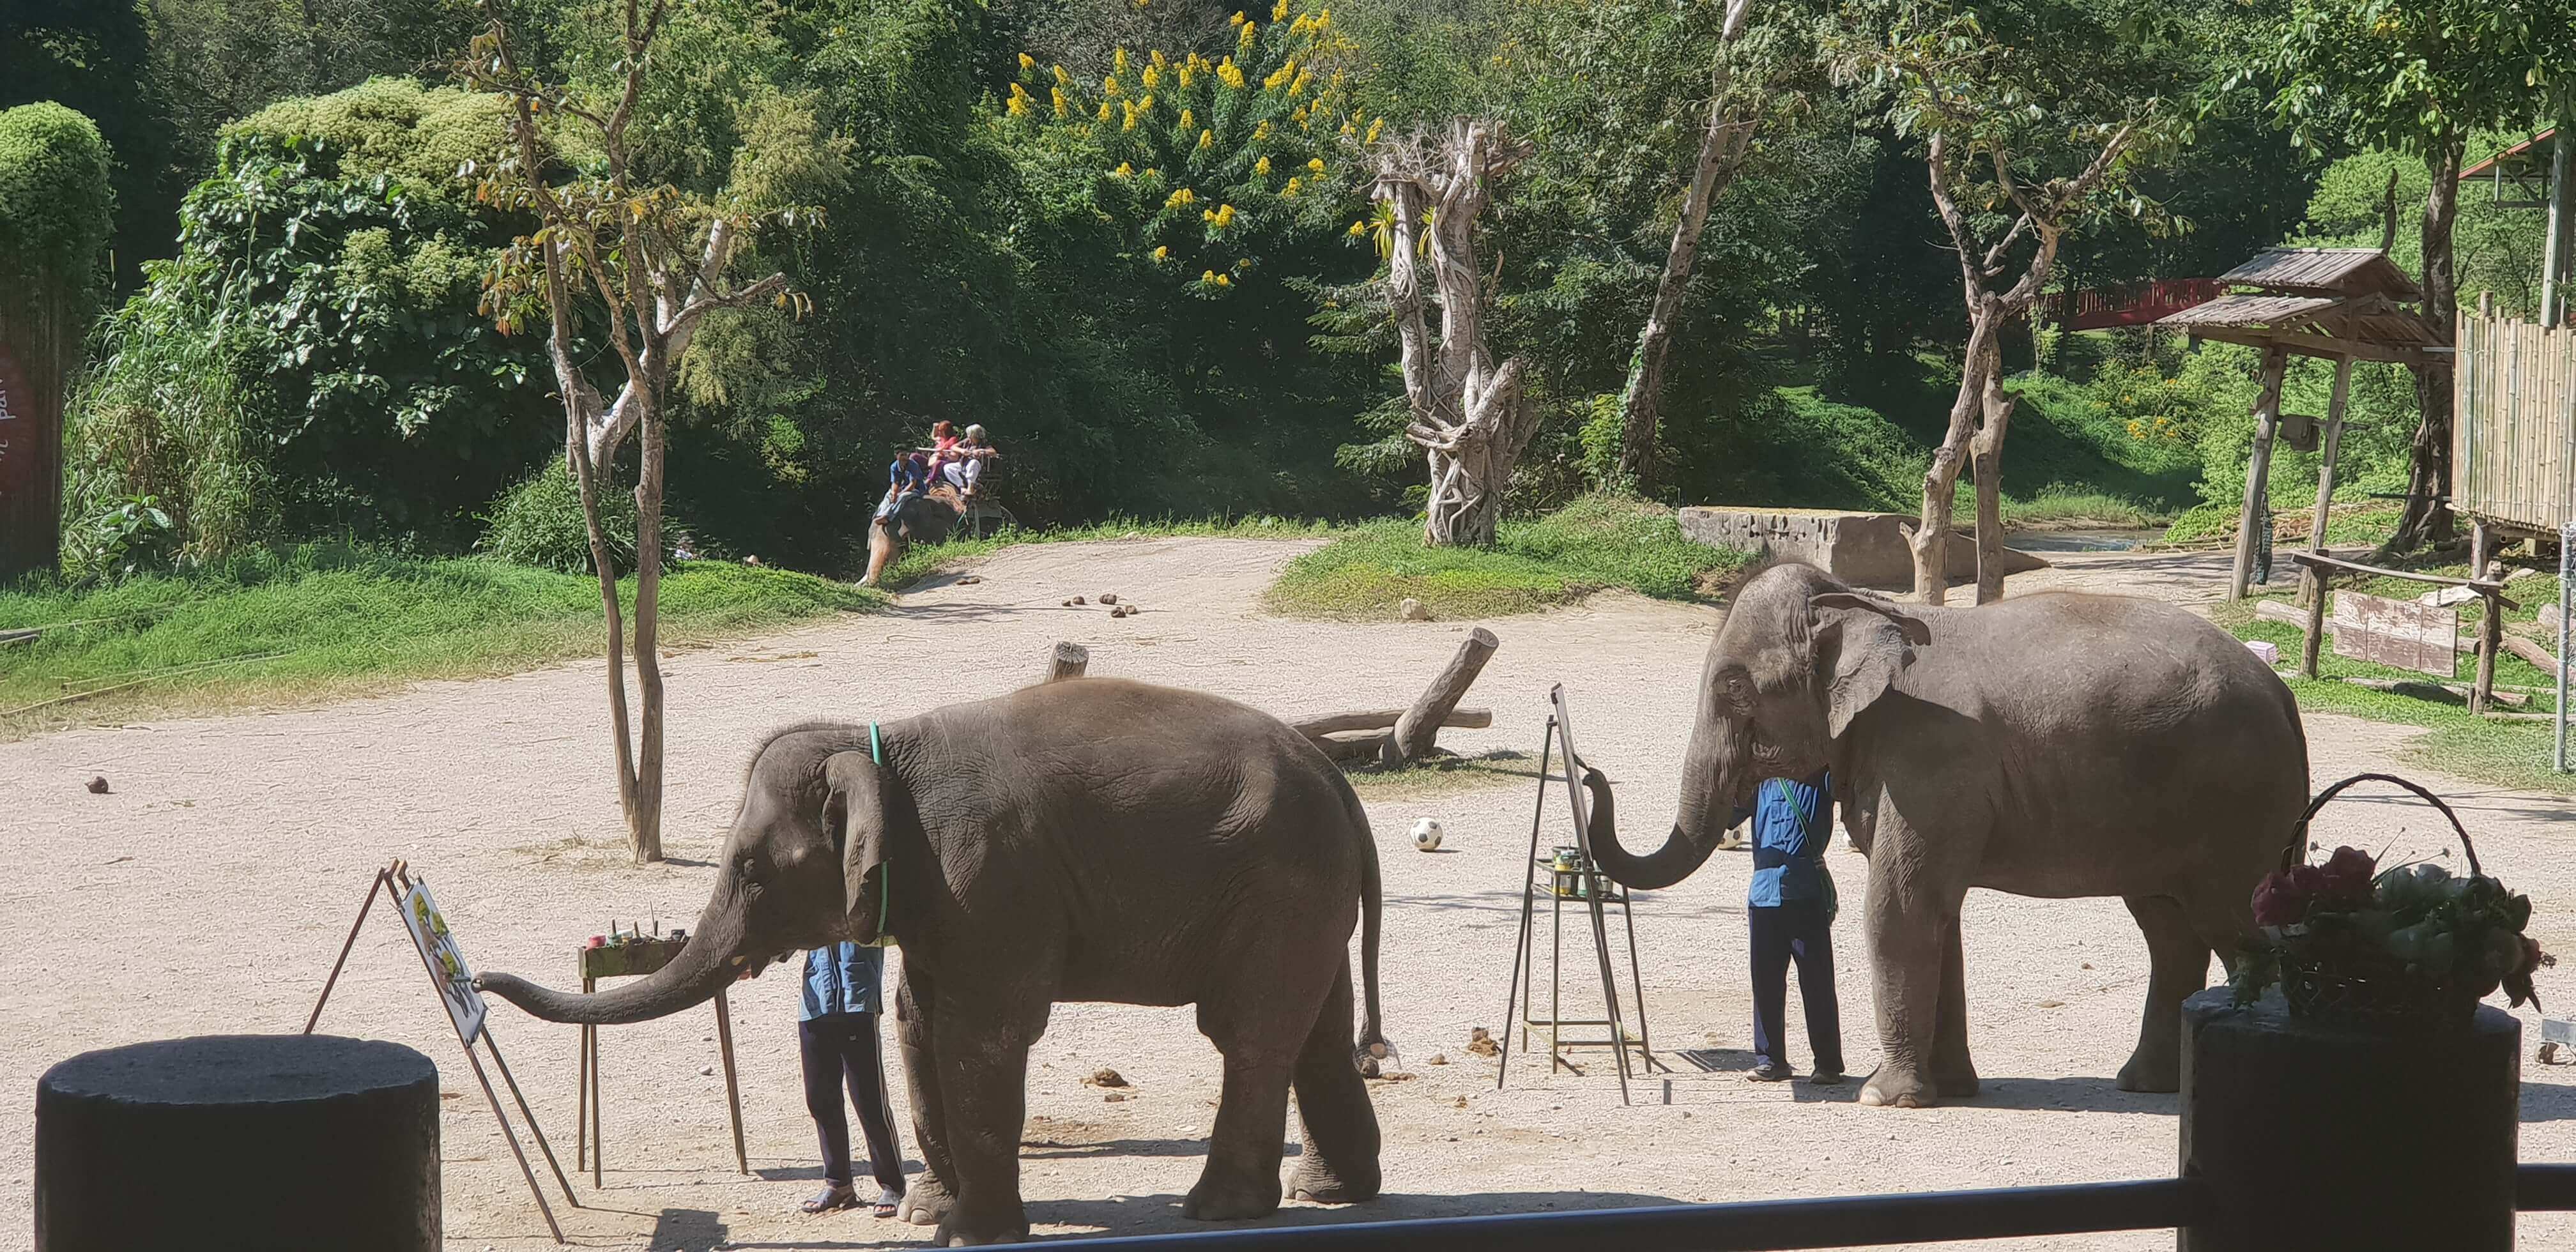 Gentle giants using their painting skills at the Maetaeng Elephant Park